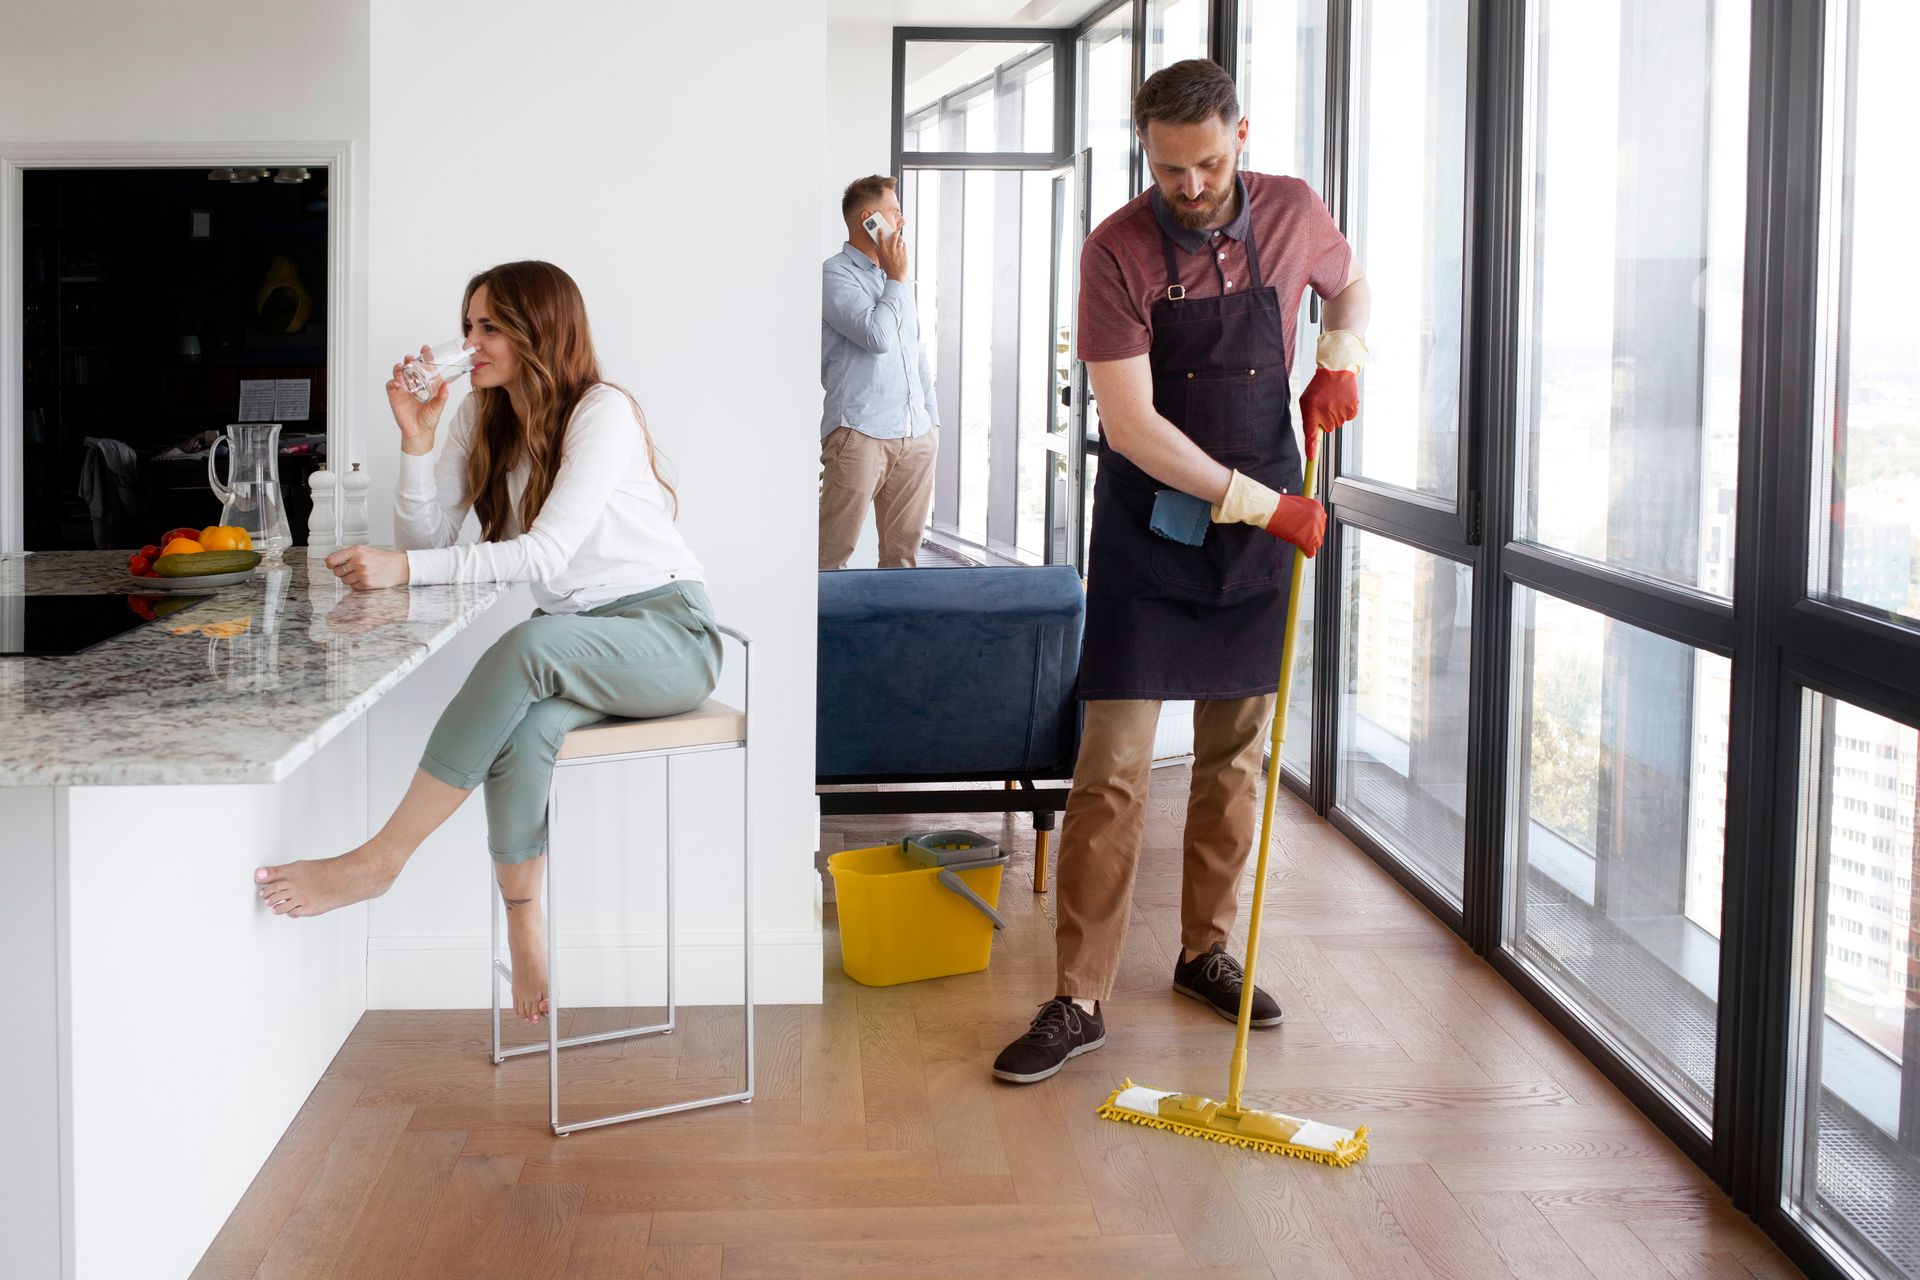 a man is mopping the floor while a woman sits at a bar drinking a glass of water